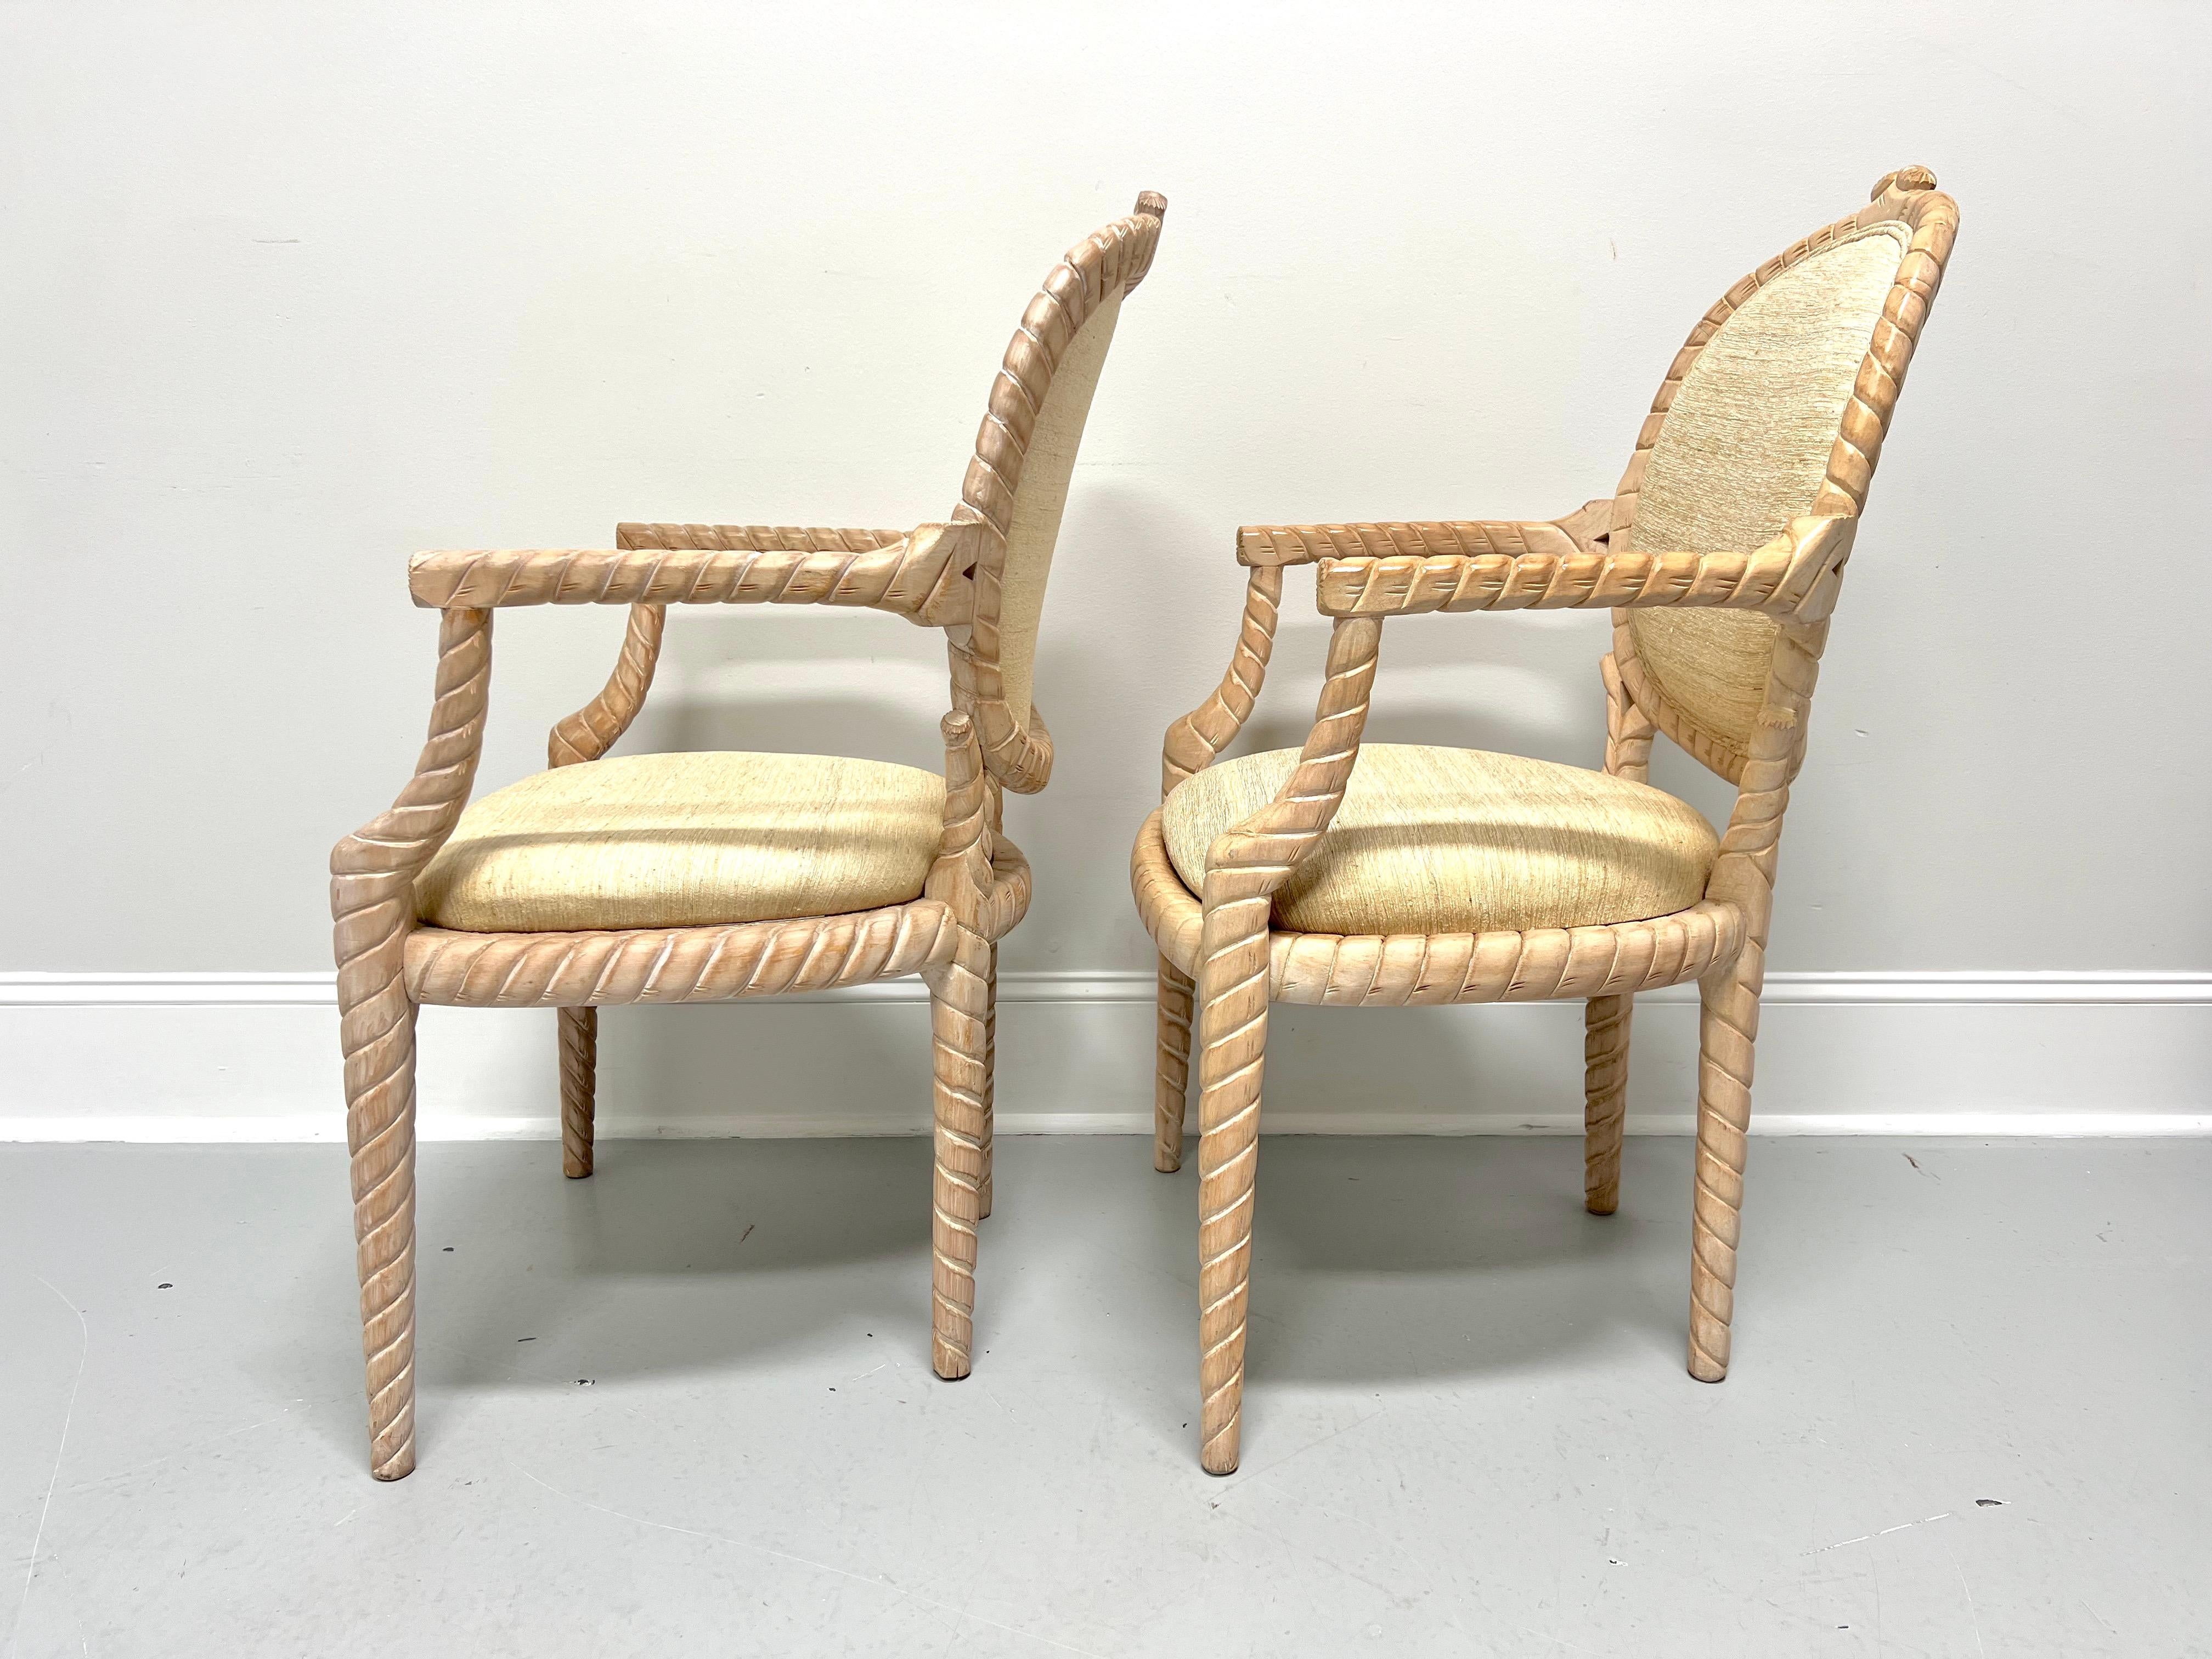 1980's Carved Whitewashed Wood Boho Rope Twist Dining Armchairs - Pair In Good Condition For Sale In Charlotte, NC